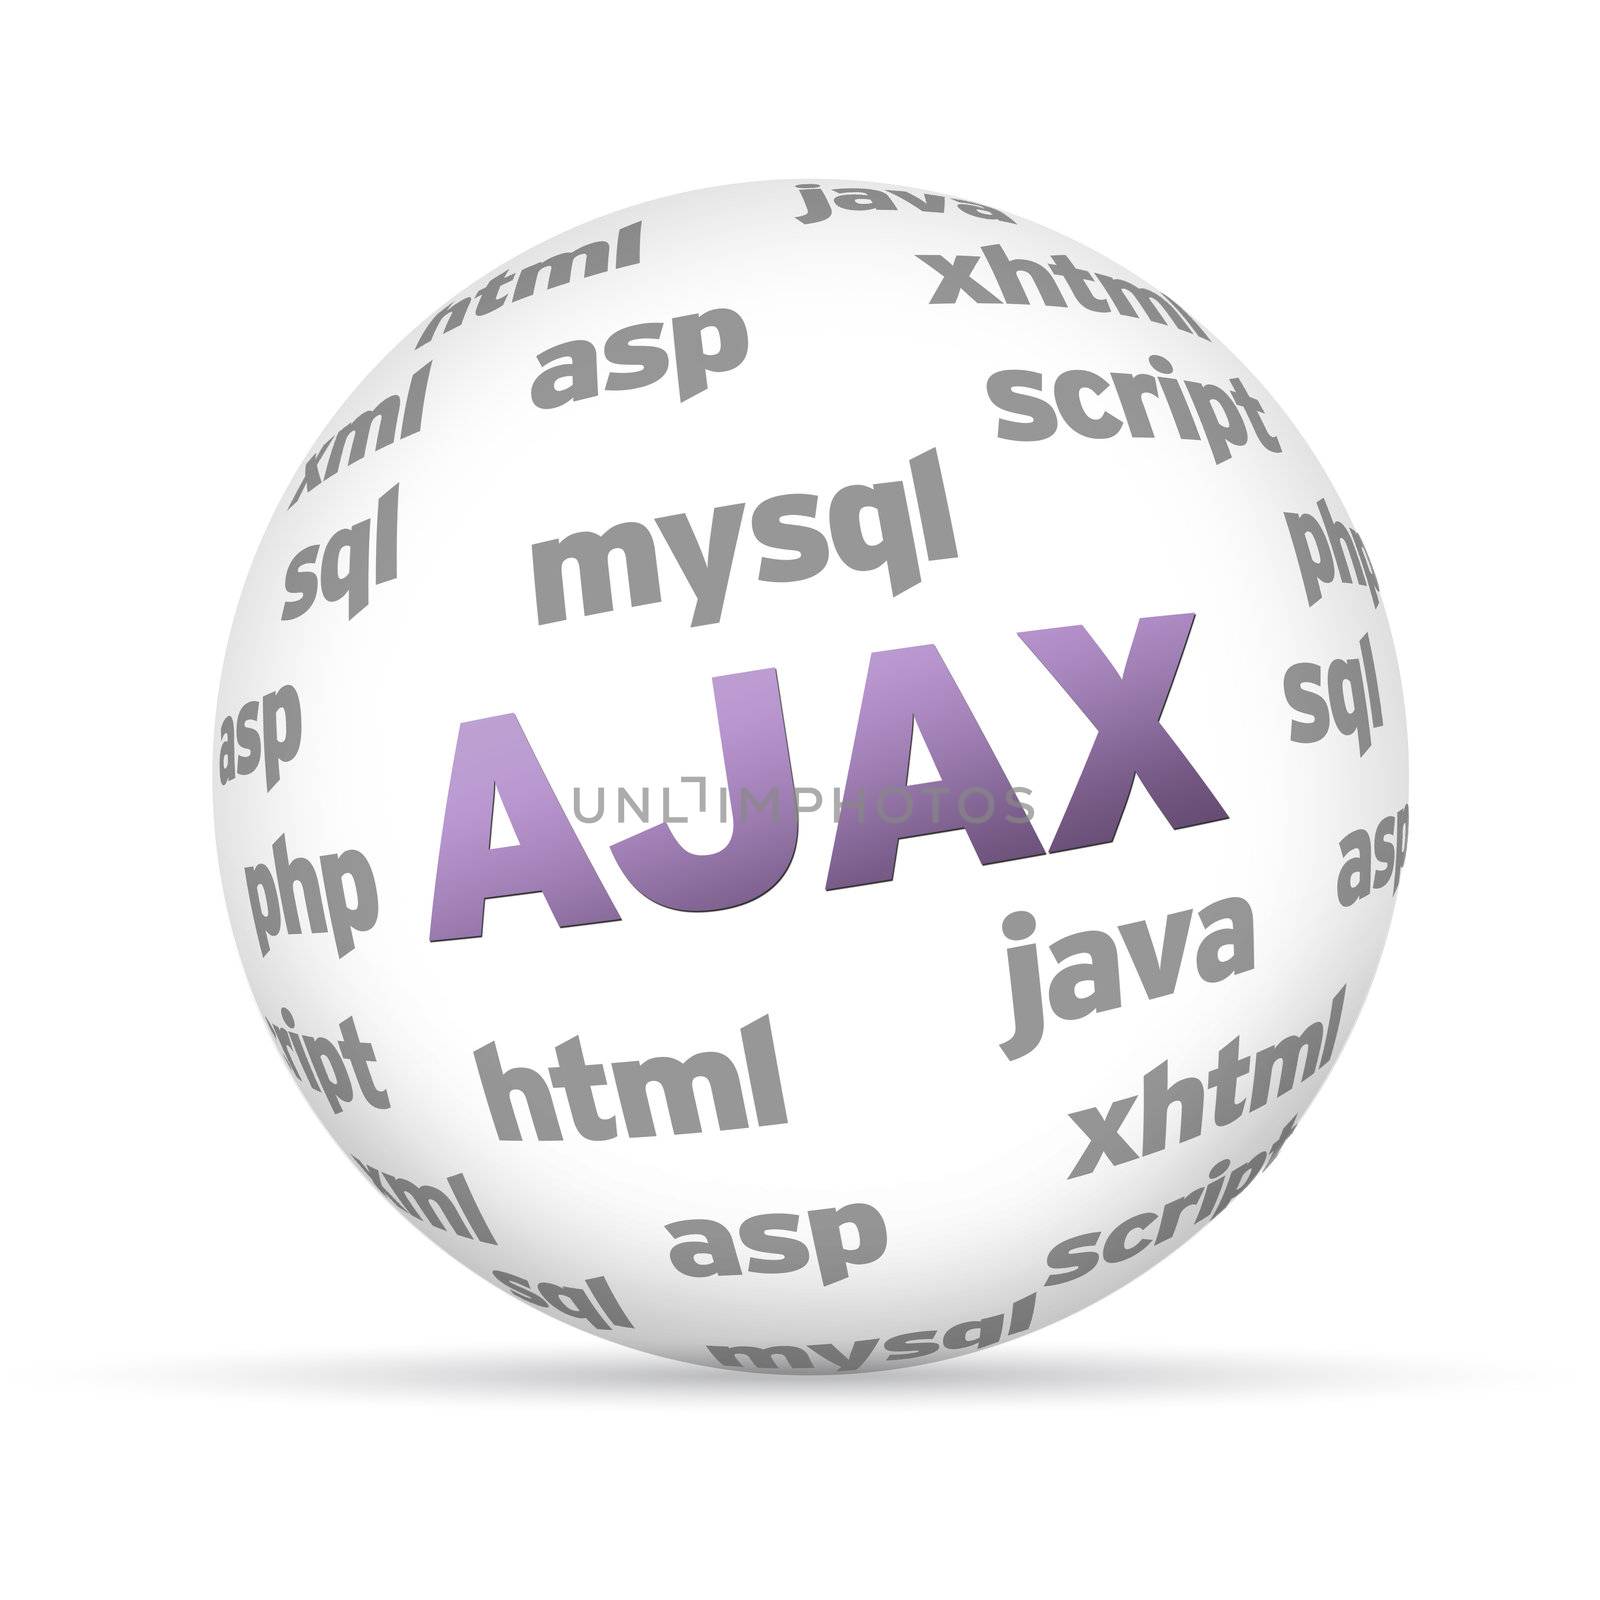 3D Ajax sphere with several words on white background.